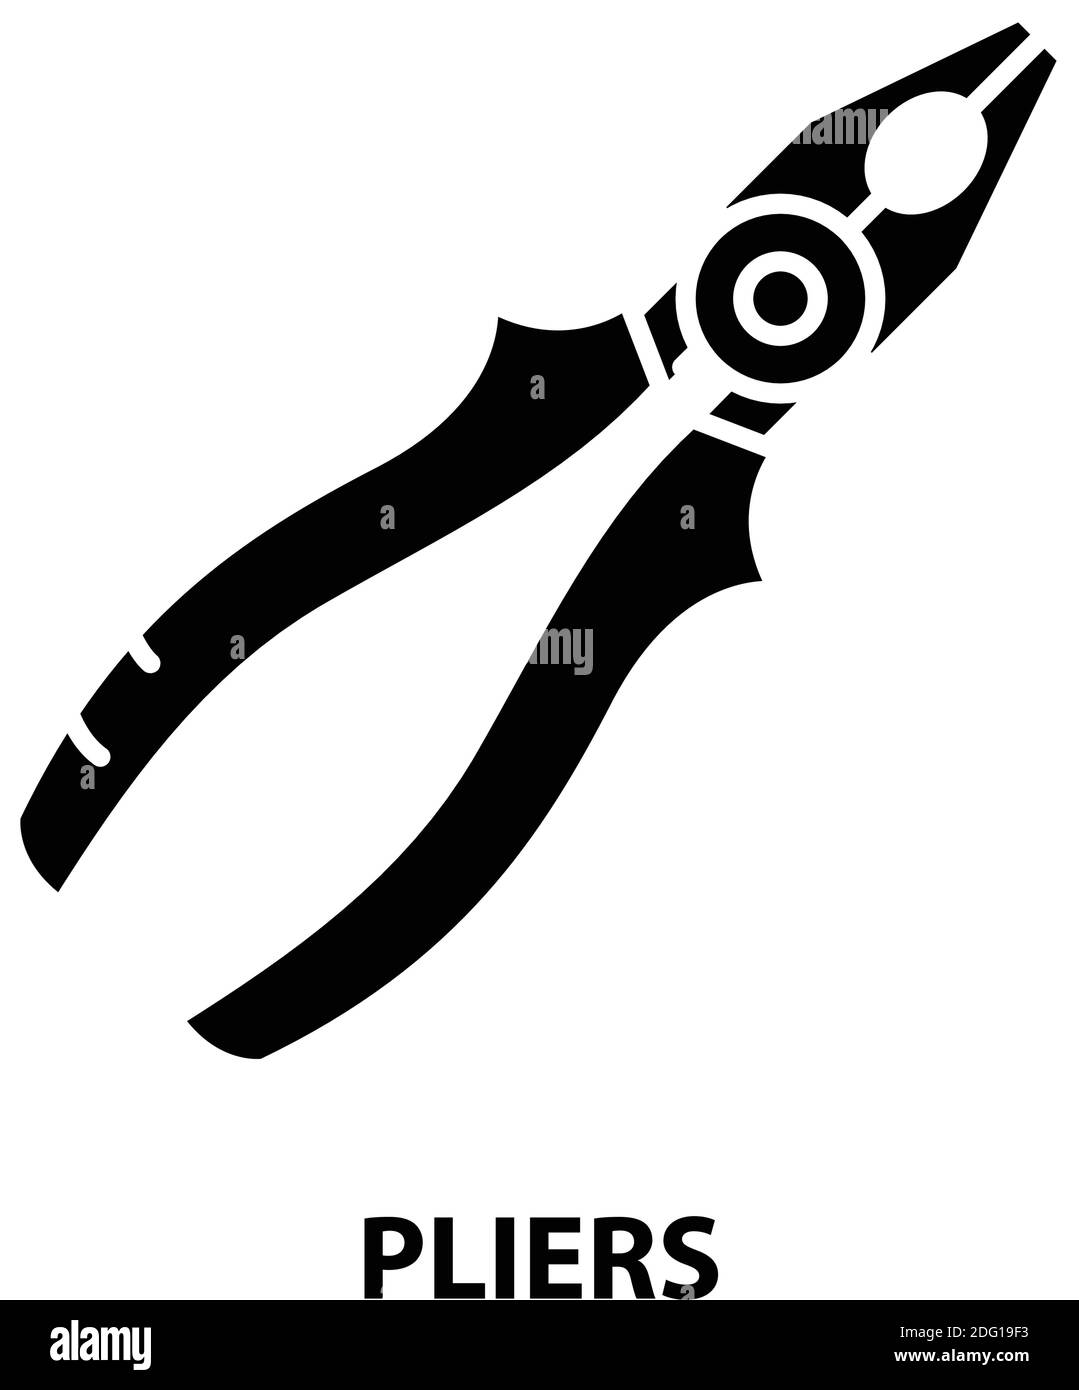 pliers symbol icon, black vector sign with editable strokes, concept illustration Stock Vector